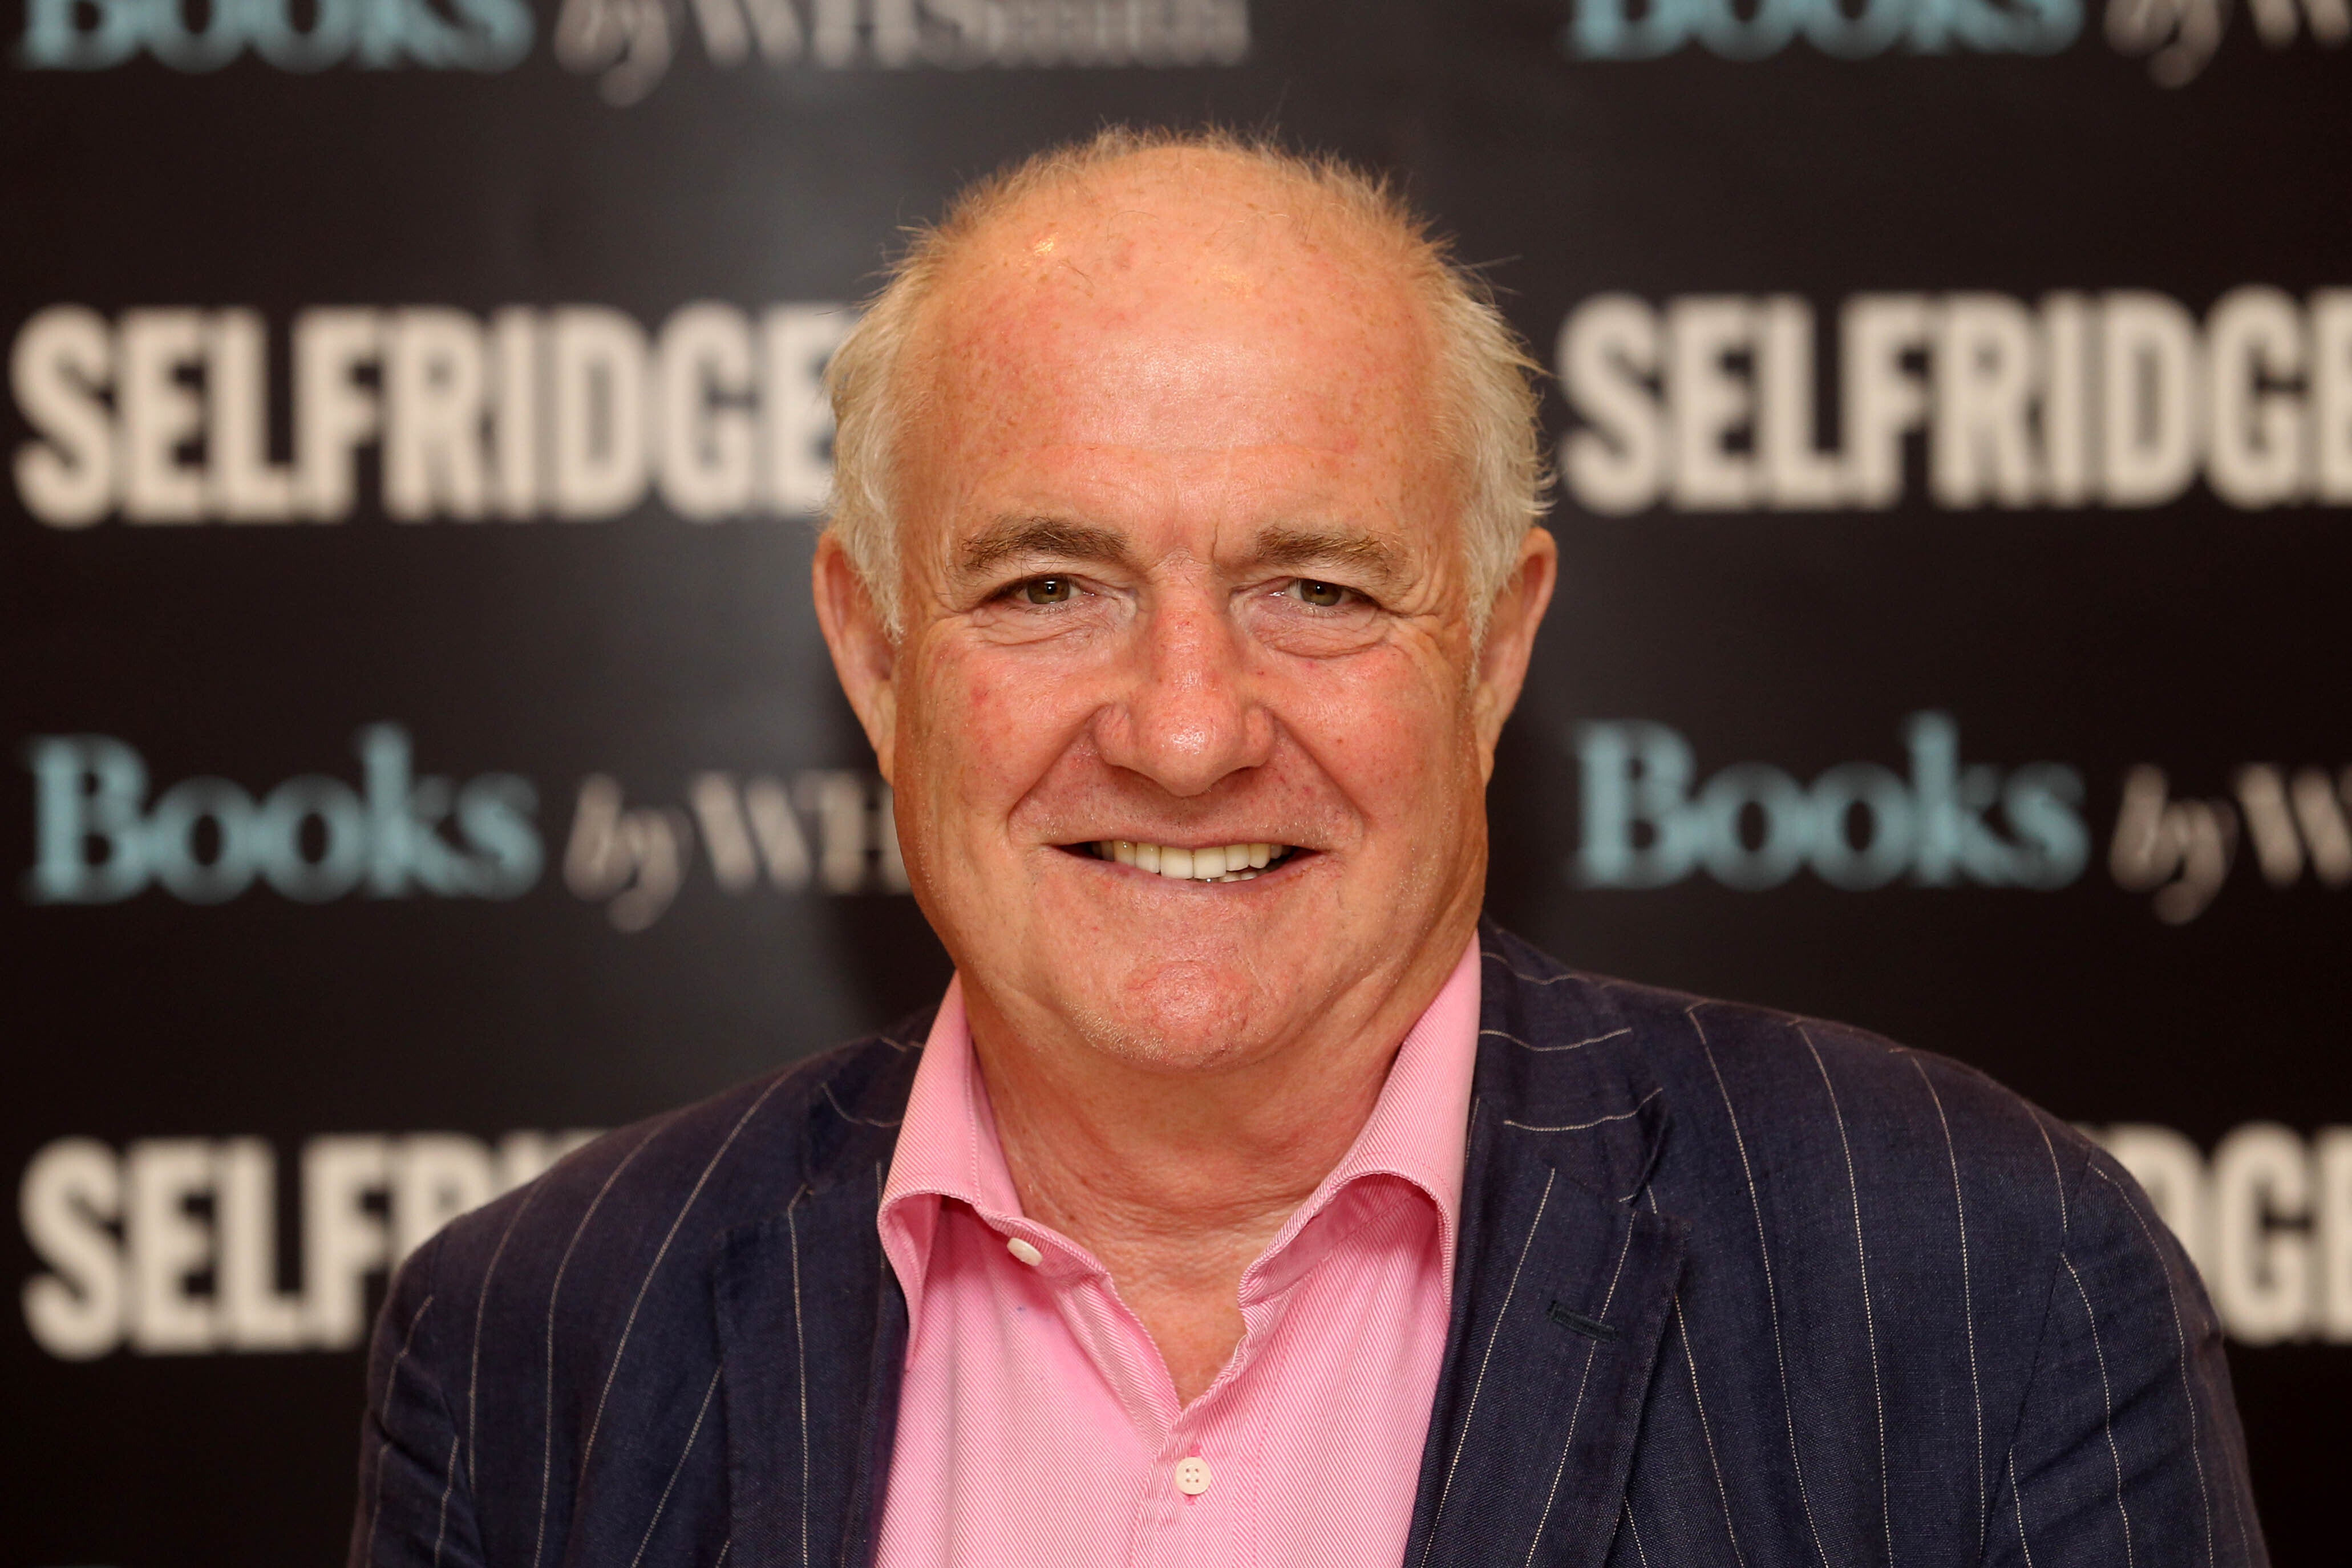 Rick Stein is based in Padstow